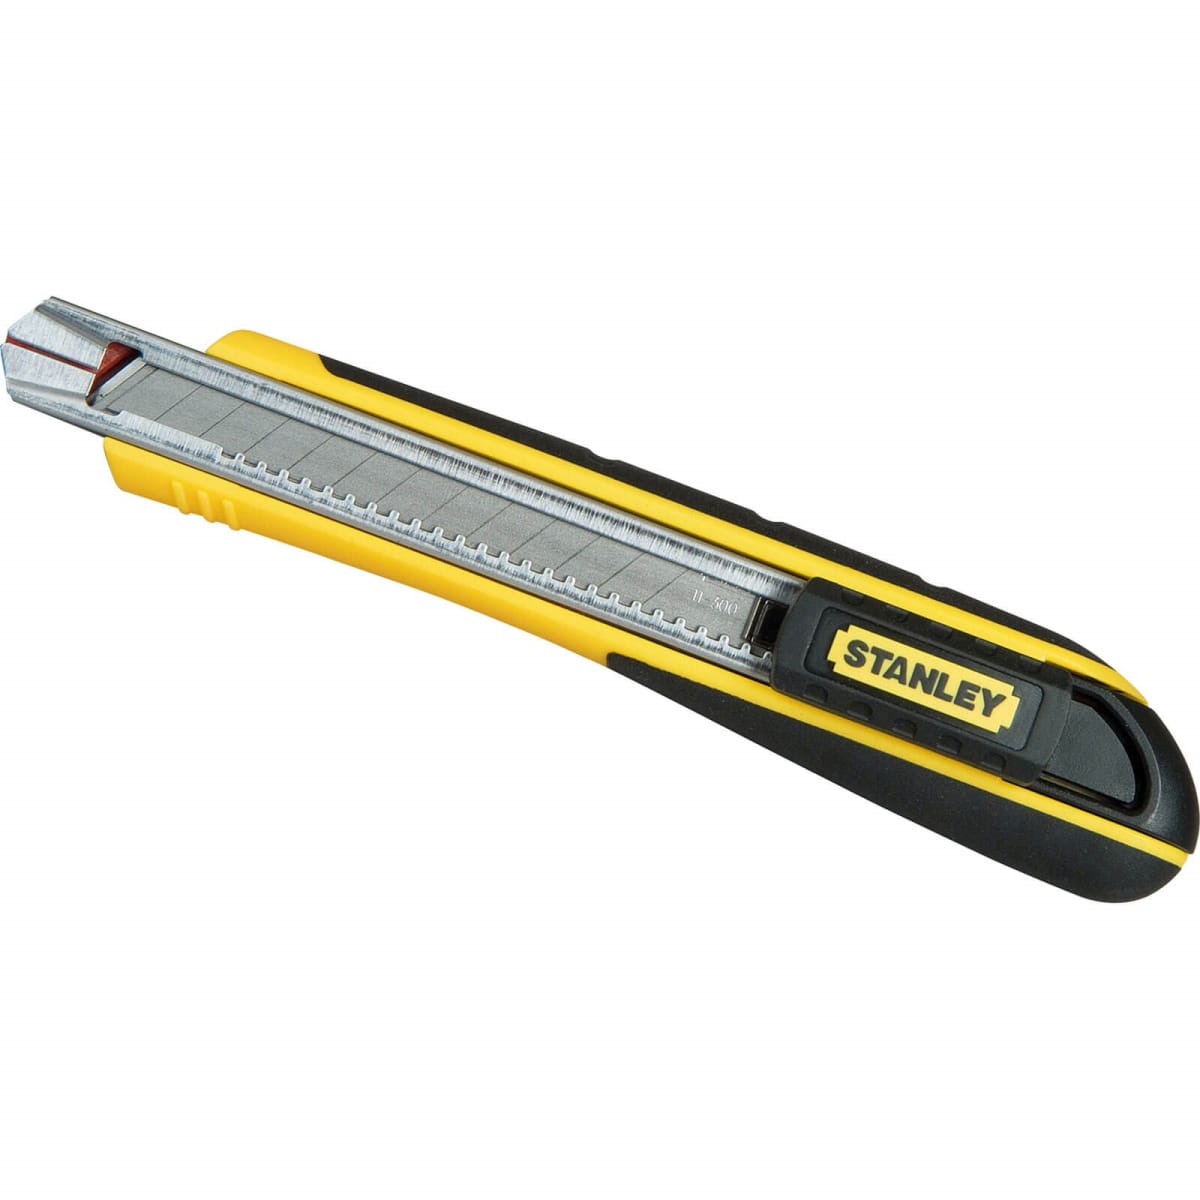 Utility knife with snap-off blades